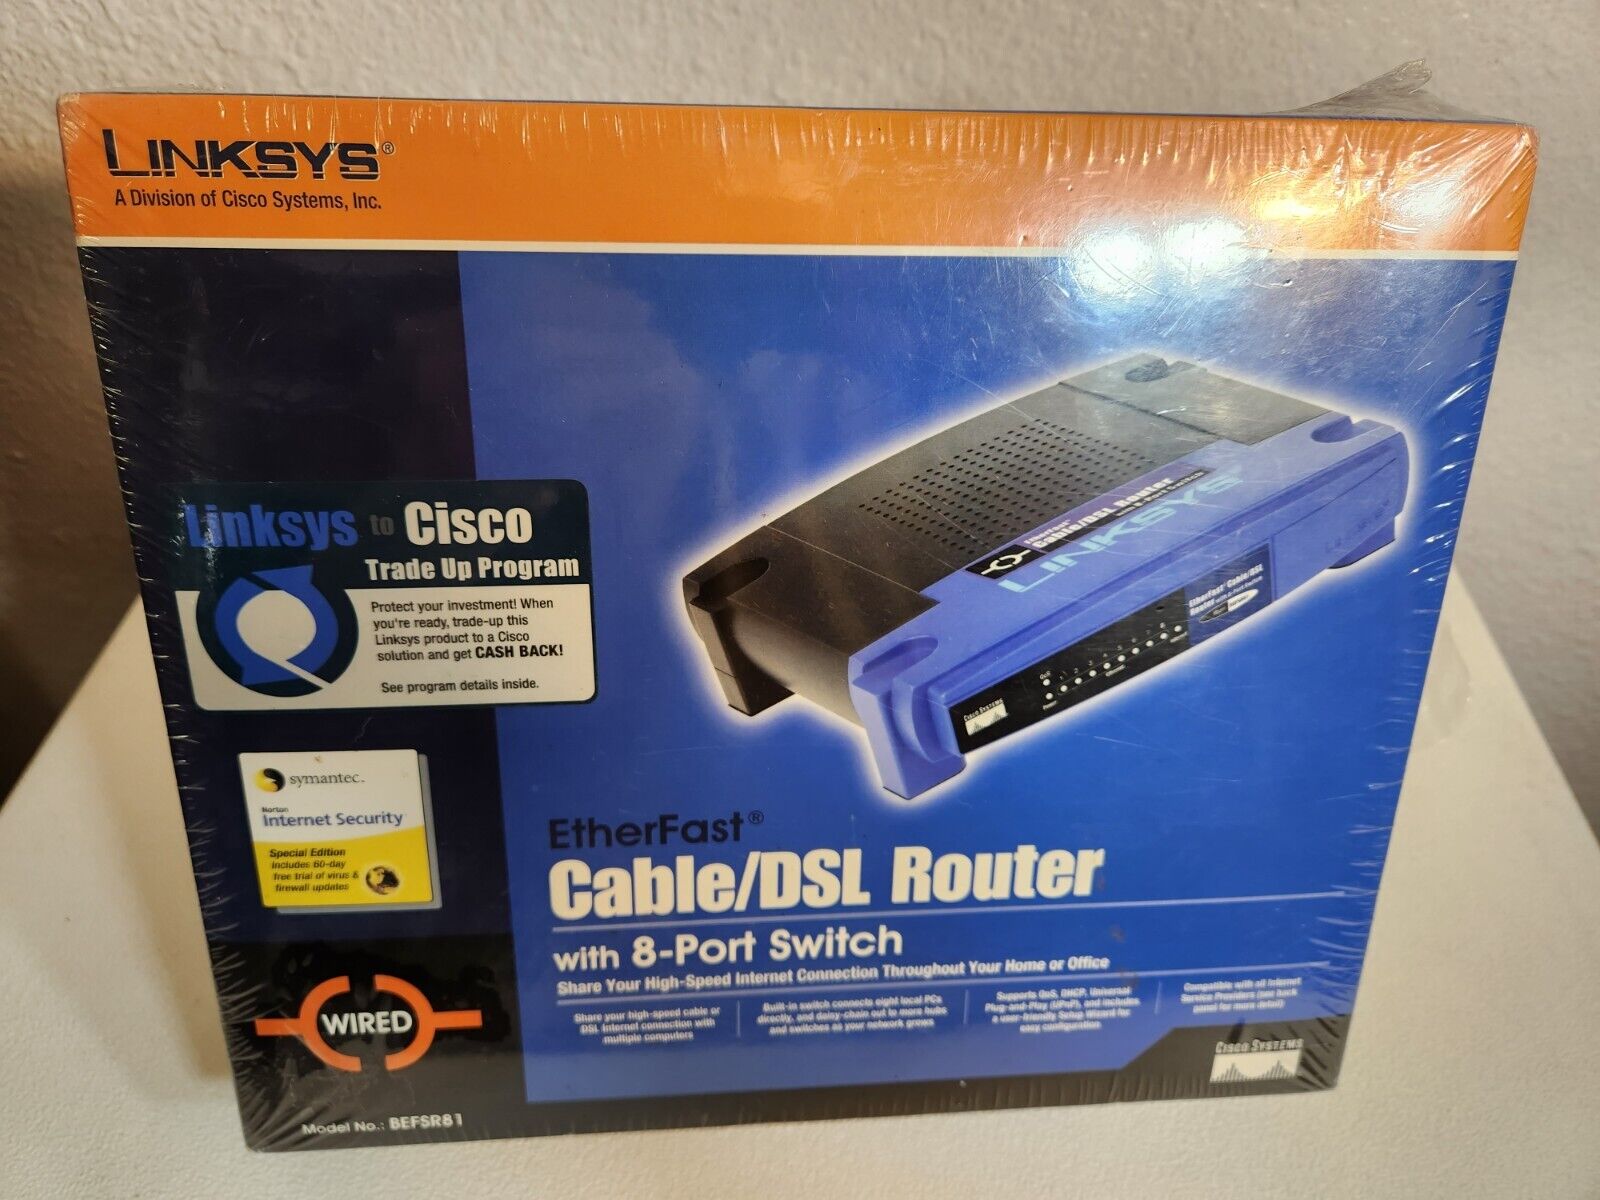 Linksys Etherfast SEALED BEFSR81 Wired Cable/DSL Router with 8-Port Switch NEW